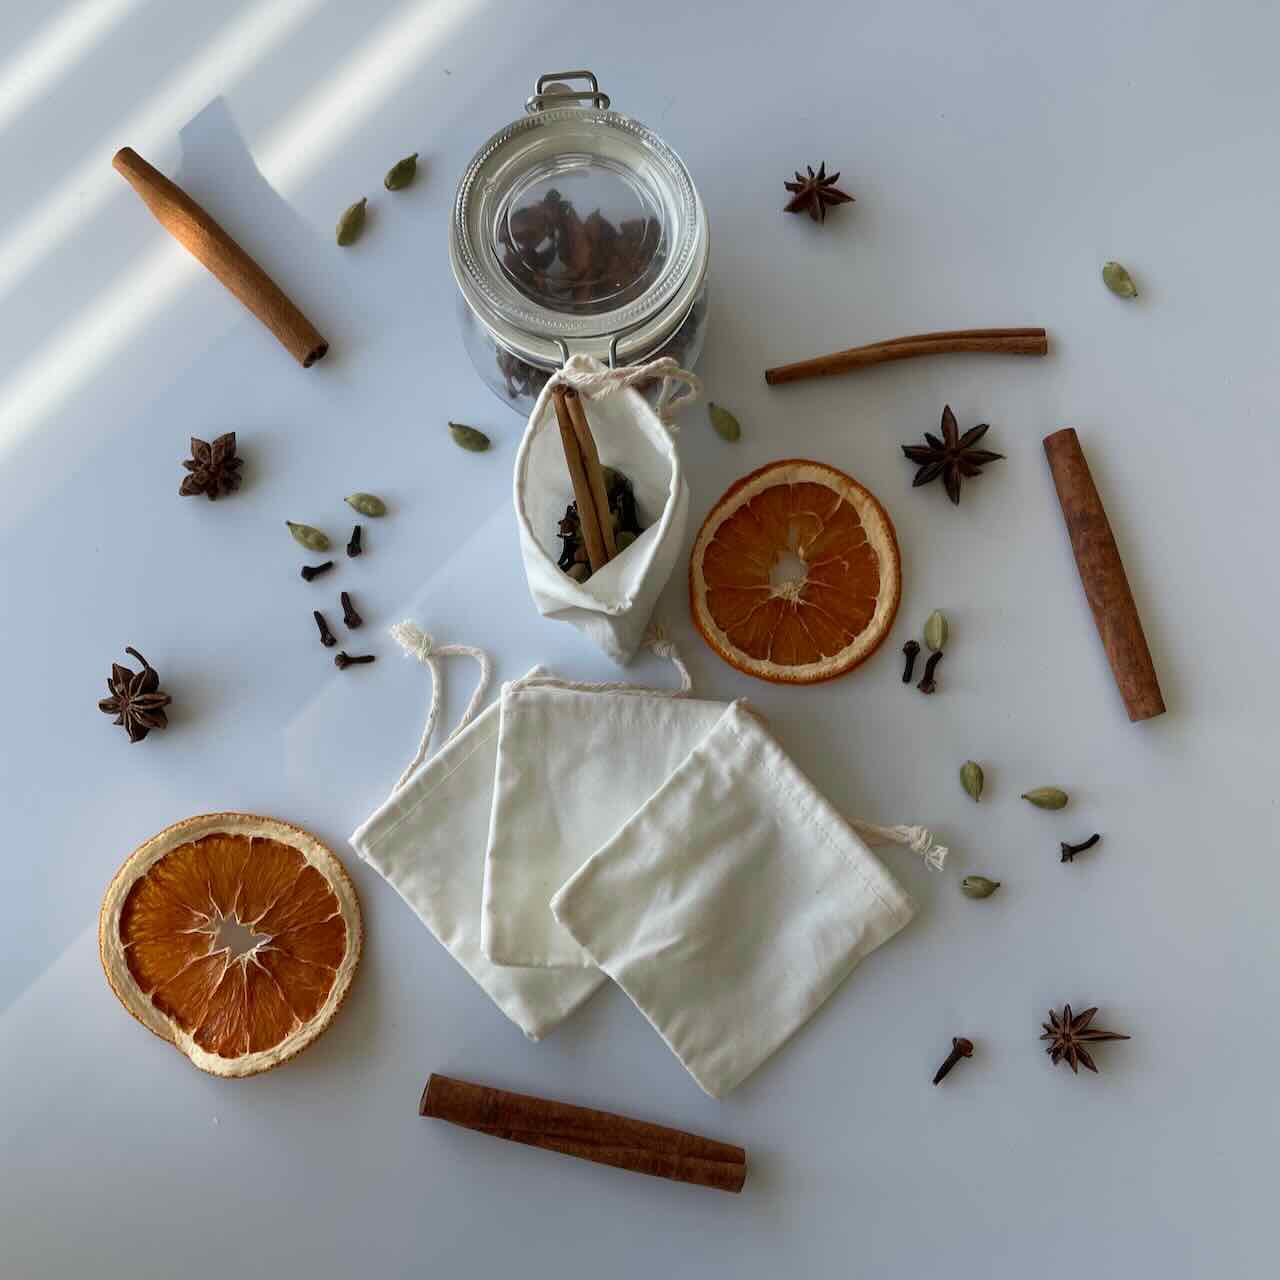 reusable muslin tea bags lay on top of a white table with spices and dried orange slices scattered around them